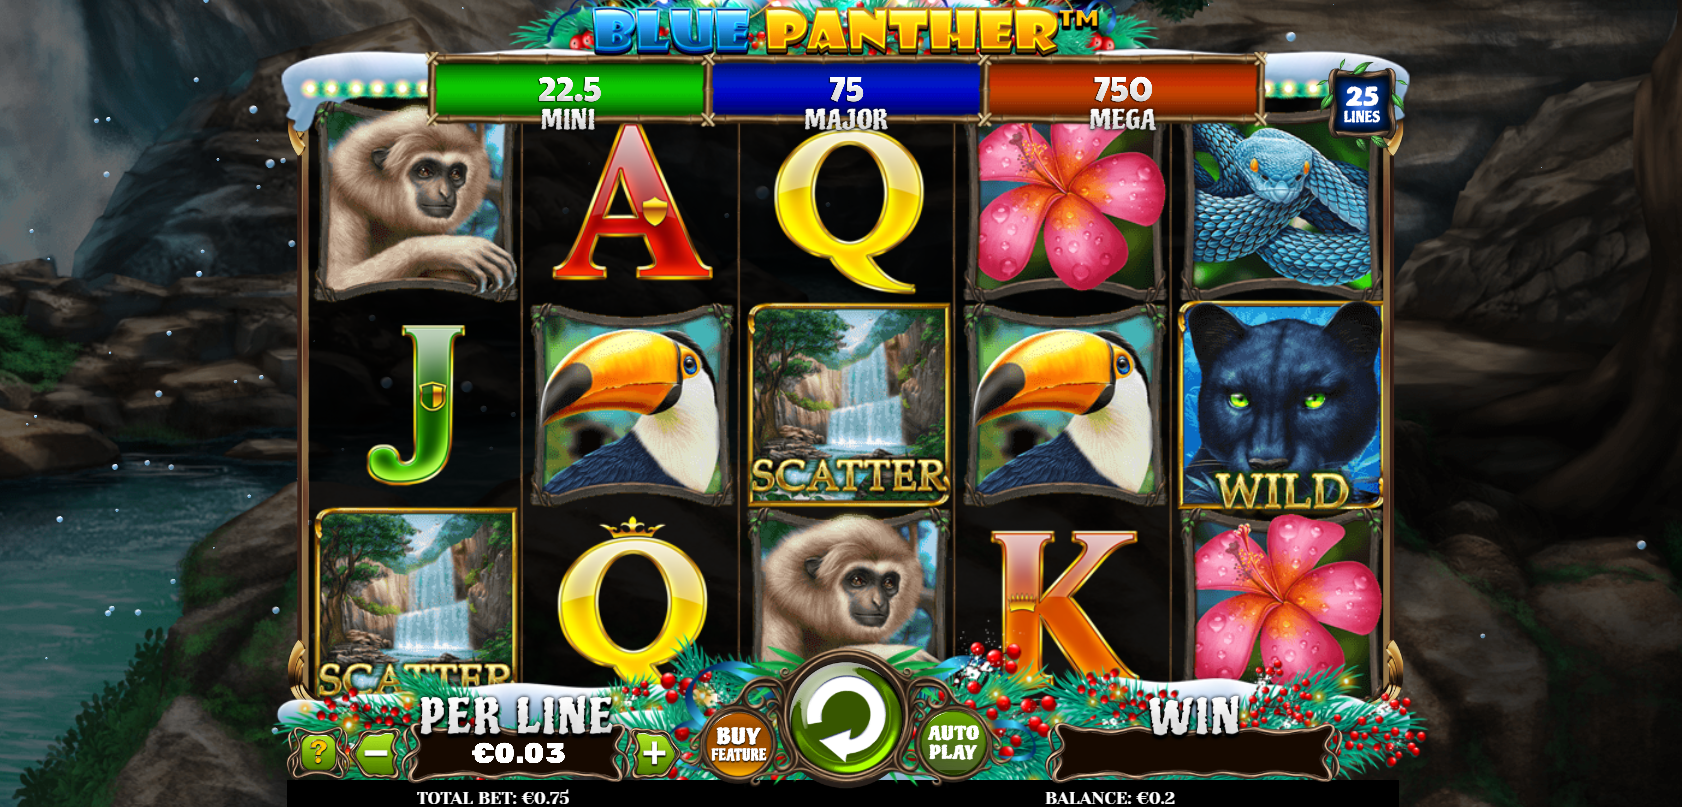 Blue Panther Christmas Edition Slot Review